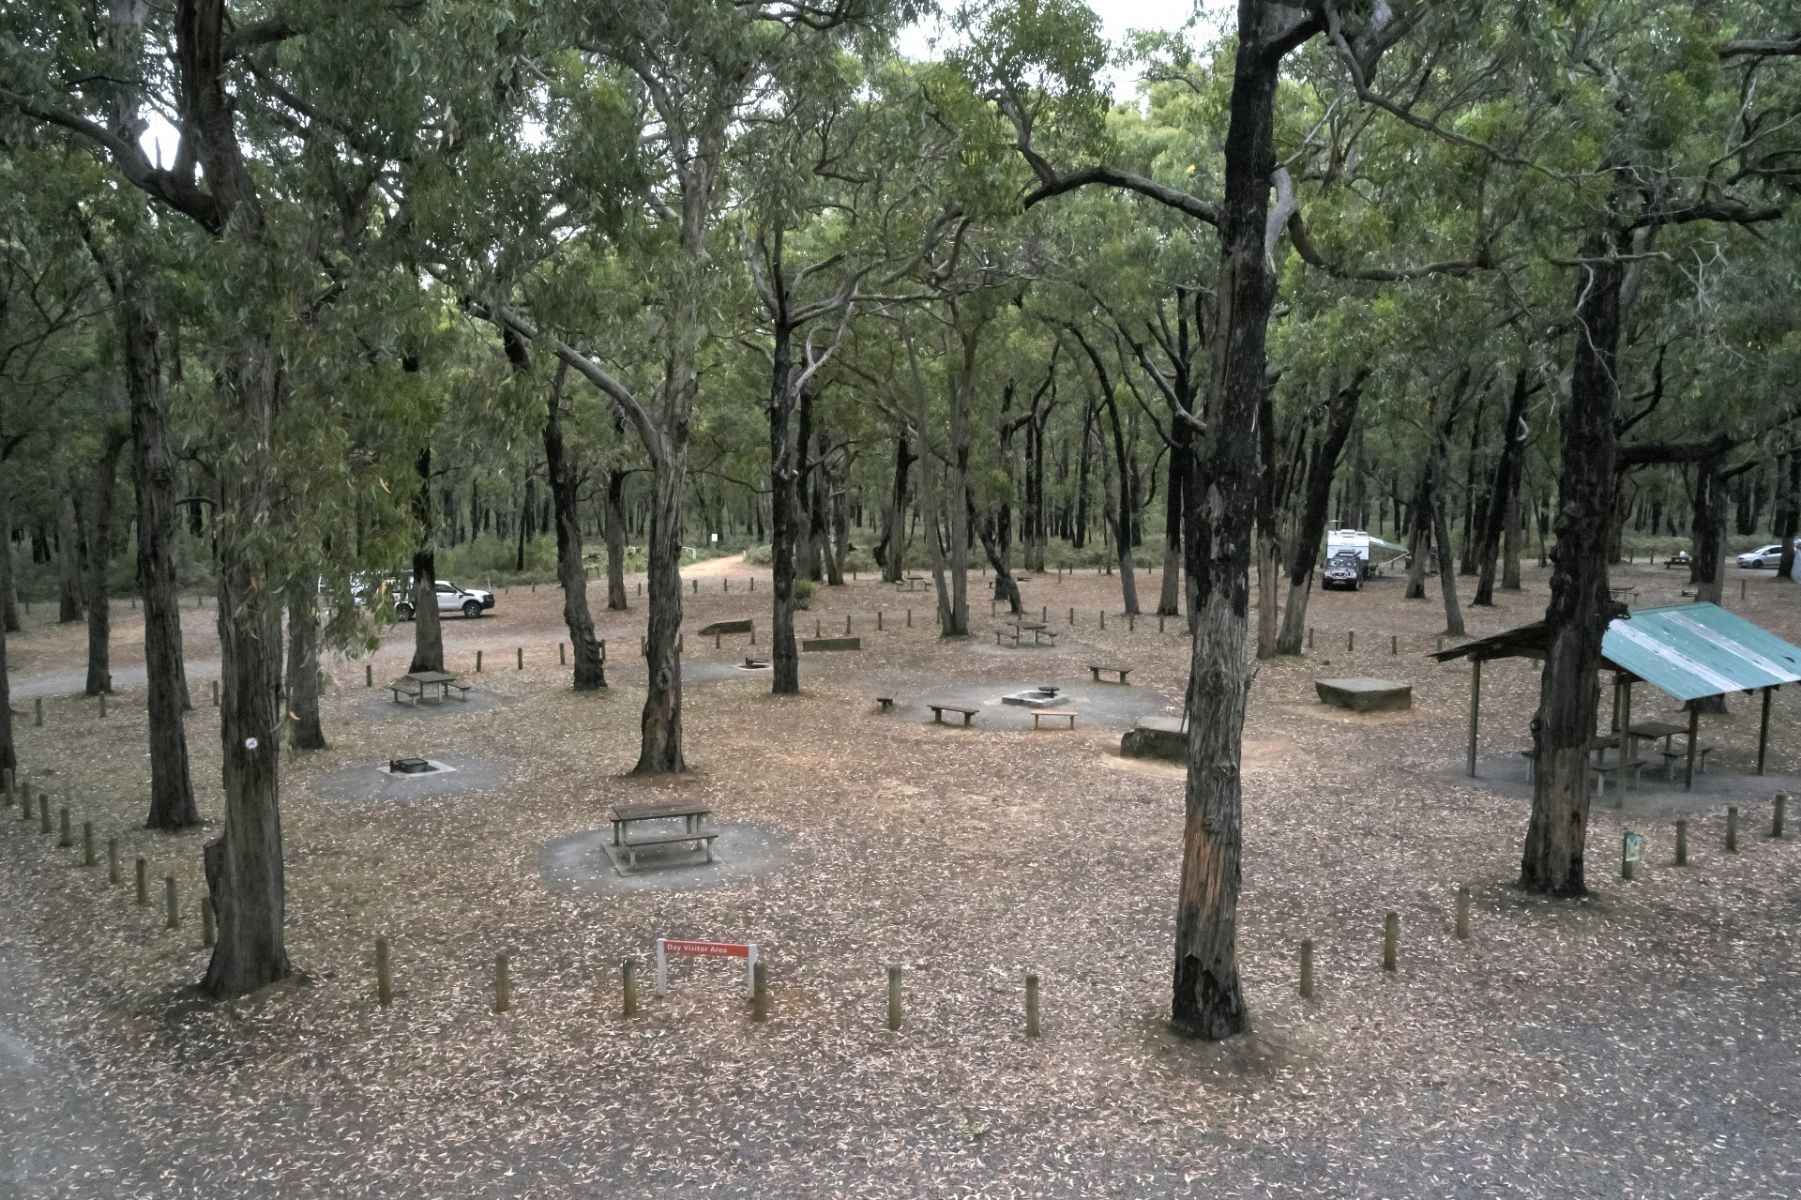 A large recreation area with picnic tables set among tall trees